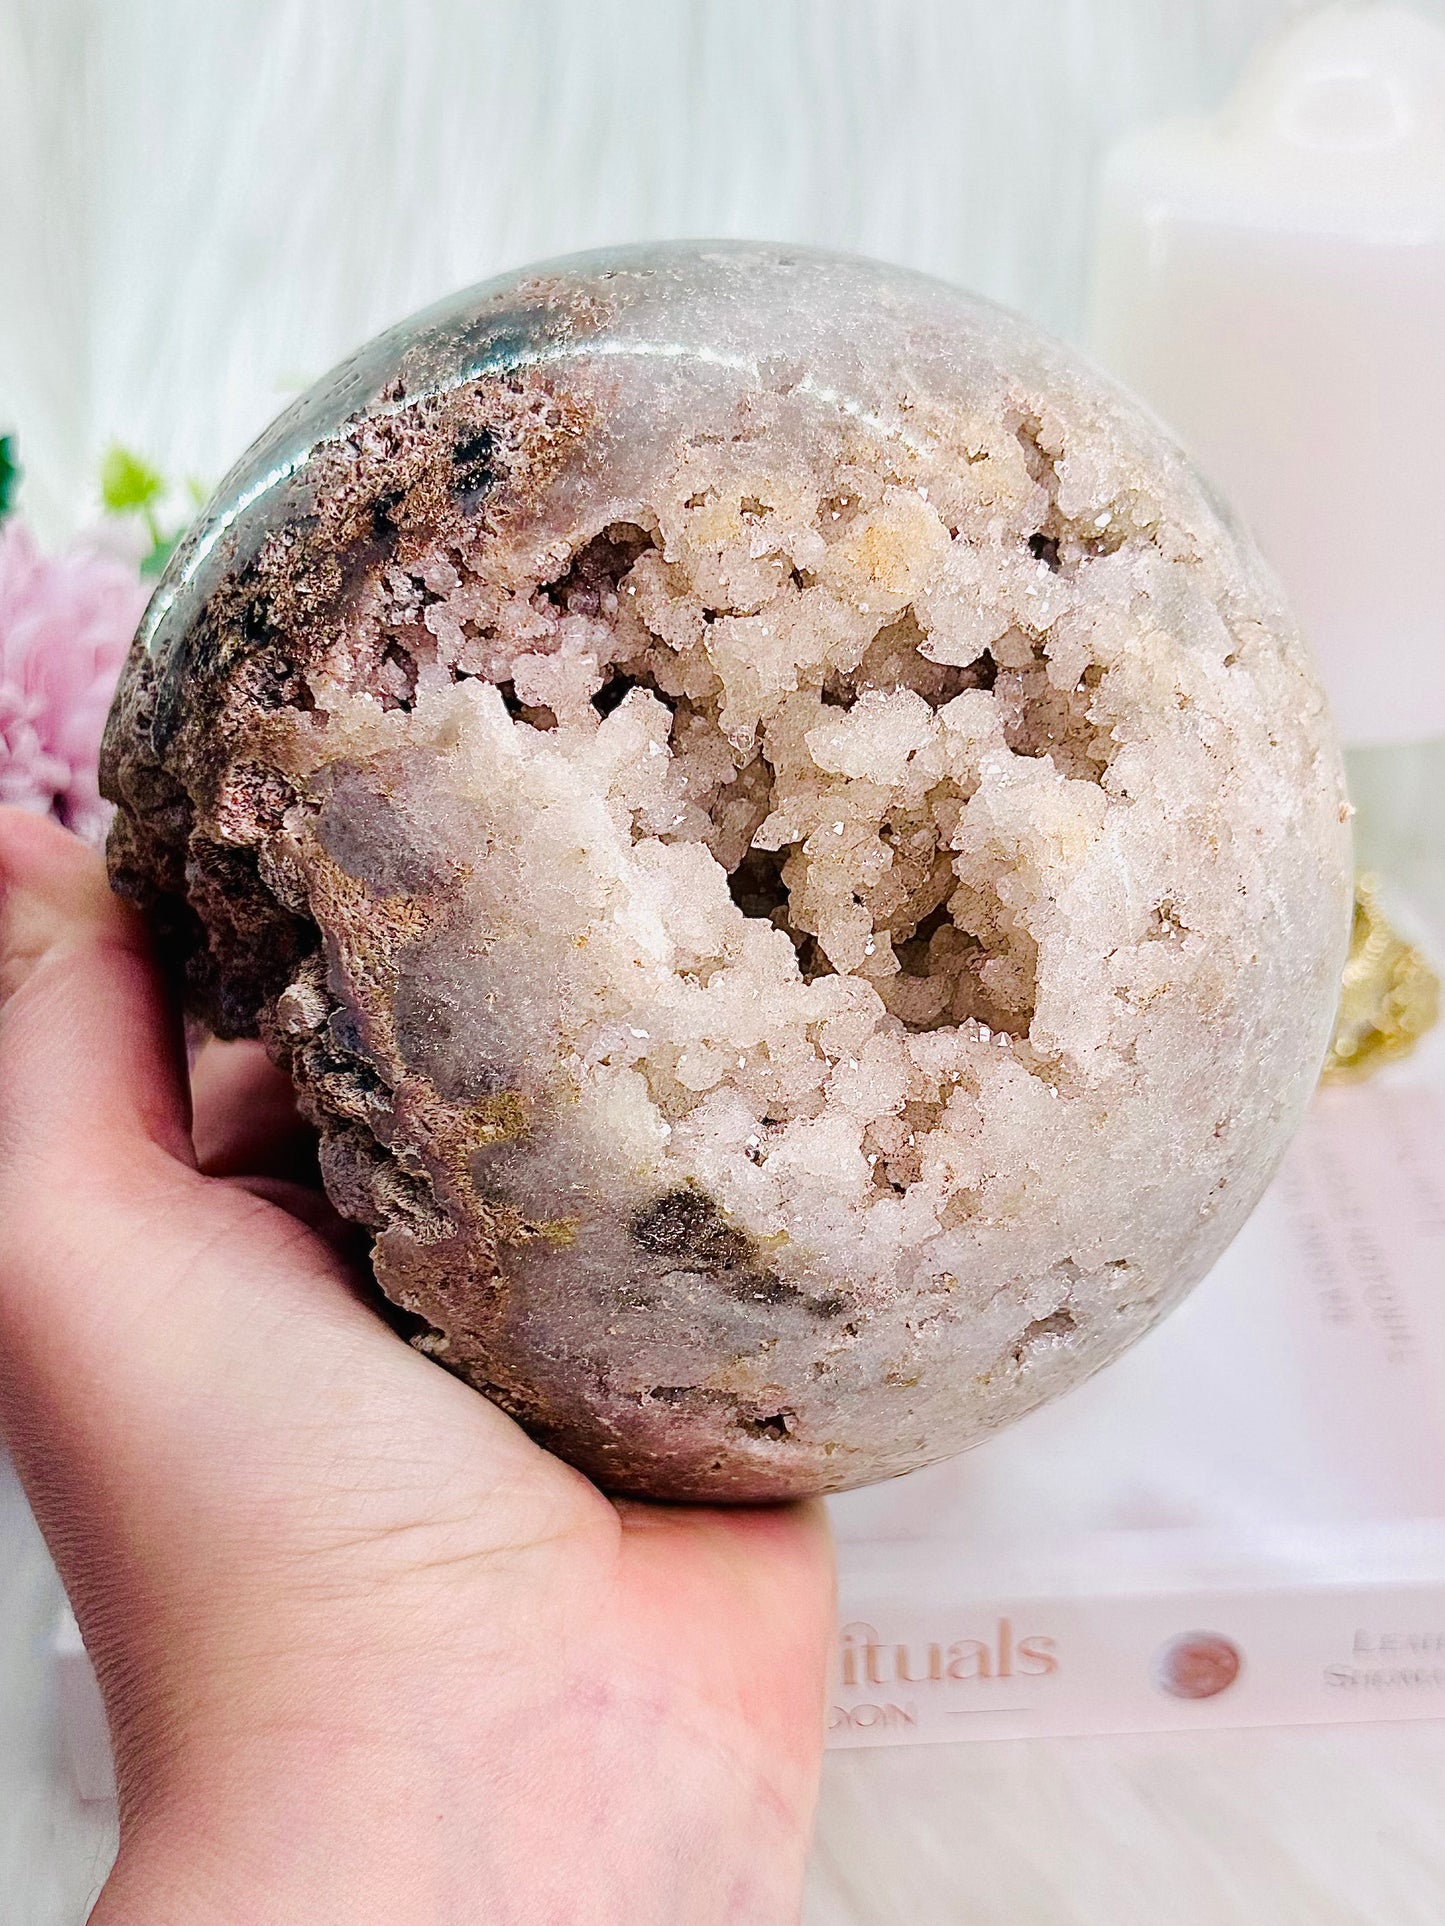 ⚜️ SALE ⚜️ ⭐️ SHE IS THE QUEEN OF SPHERES ⭐️ WOW!!! Classy & Fabulous HUGE 1.72KG 12cm Sparkling Stunning Pink Amethyst Druzy Sphere From Brazil Comes With A Stand (The stand in pic is display only)